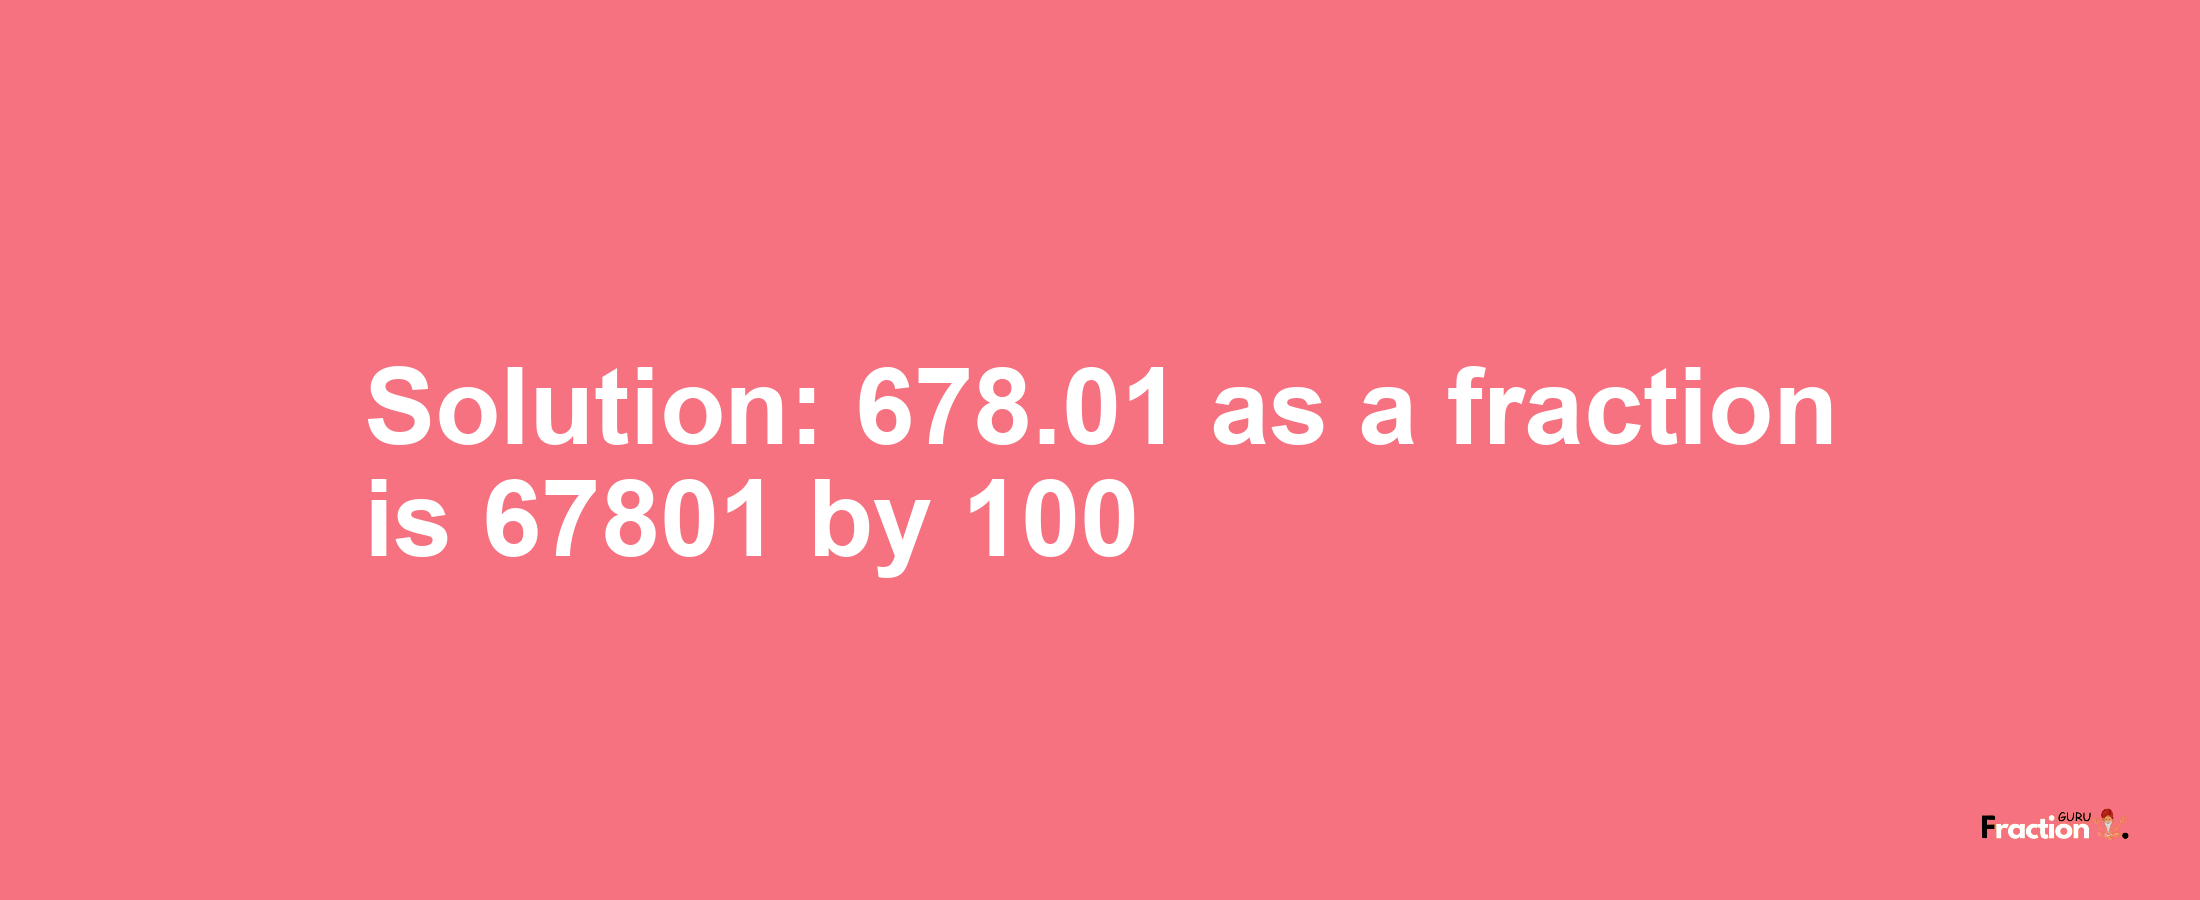 Solution:678.01 as a fraction is 67801/100